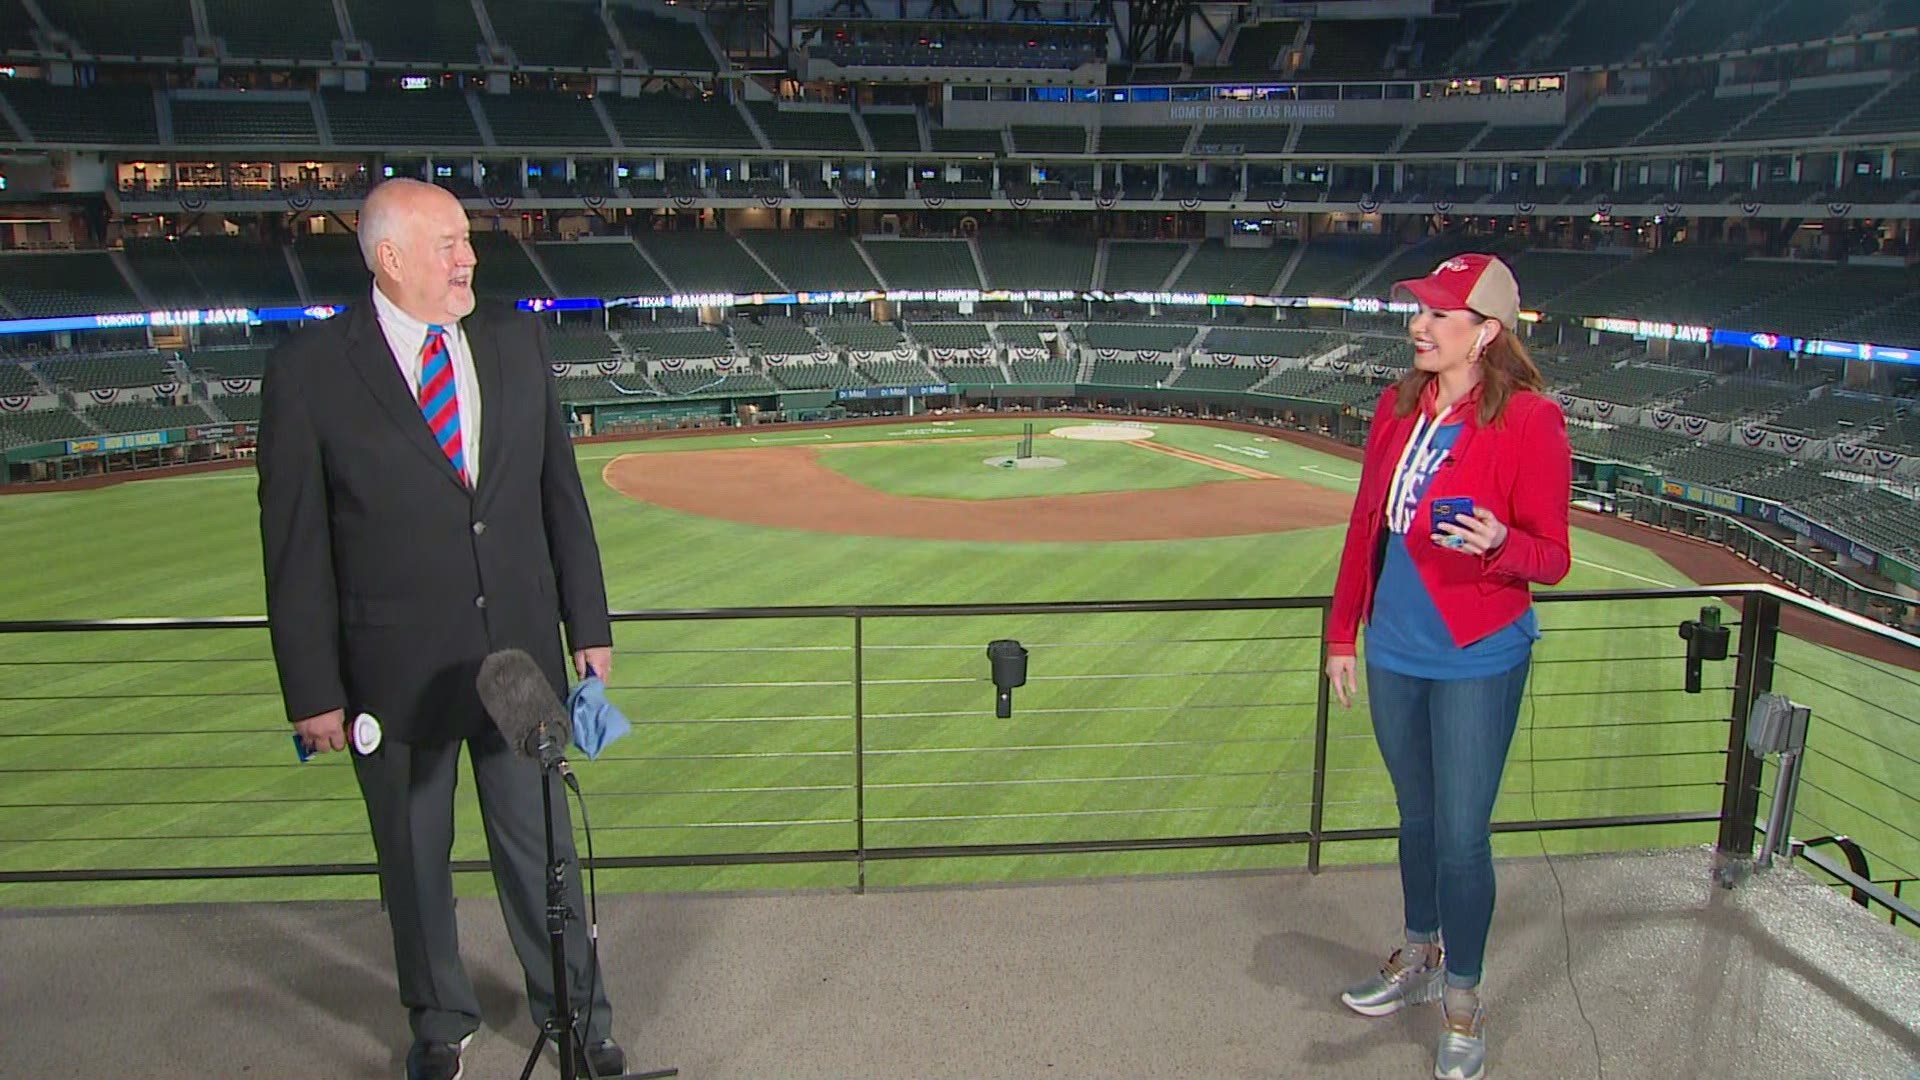 Rangers Executive Vice President Chuck Morgan joined WFAA ahead of the Rangers home opener at the new Globe Life Field to talk all things baseball.